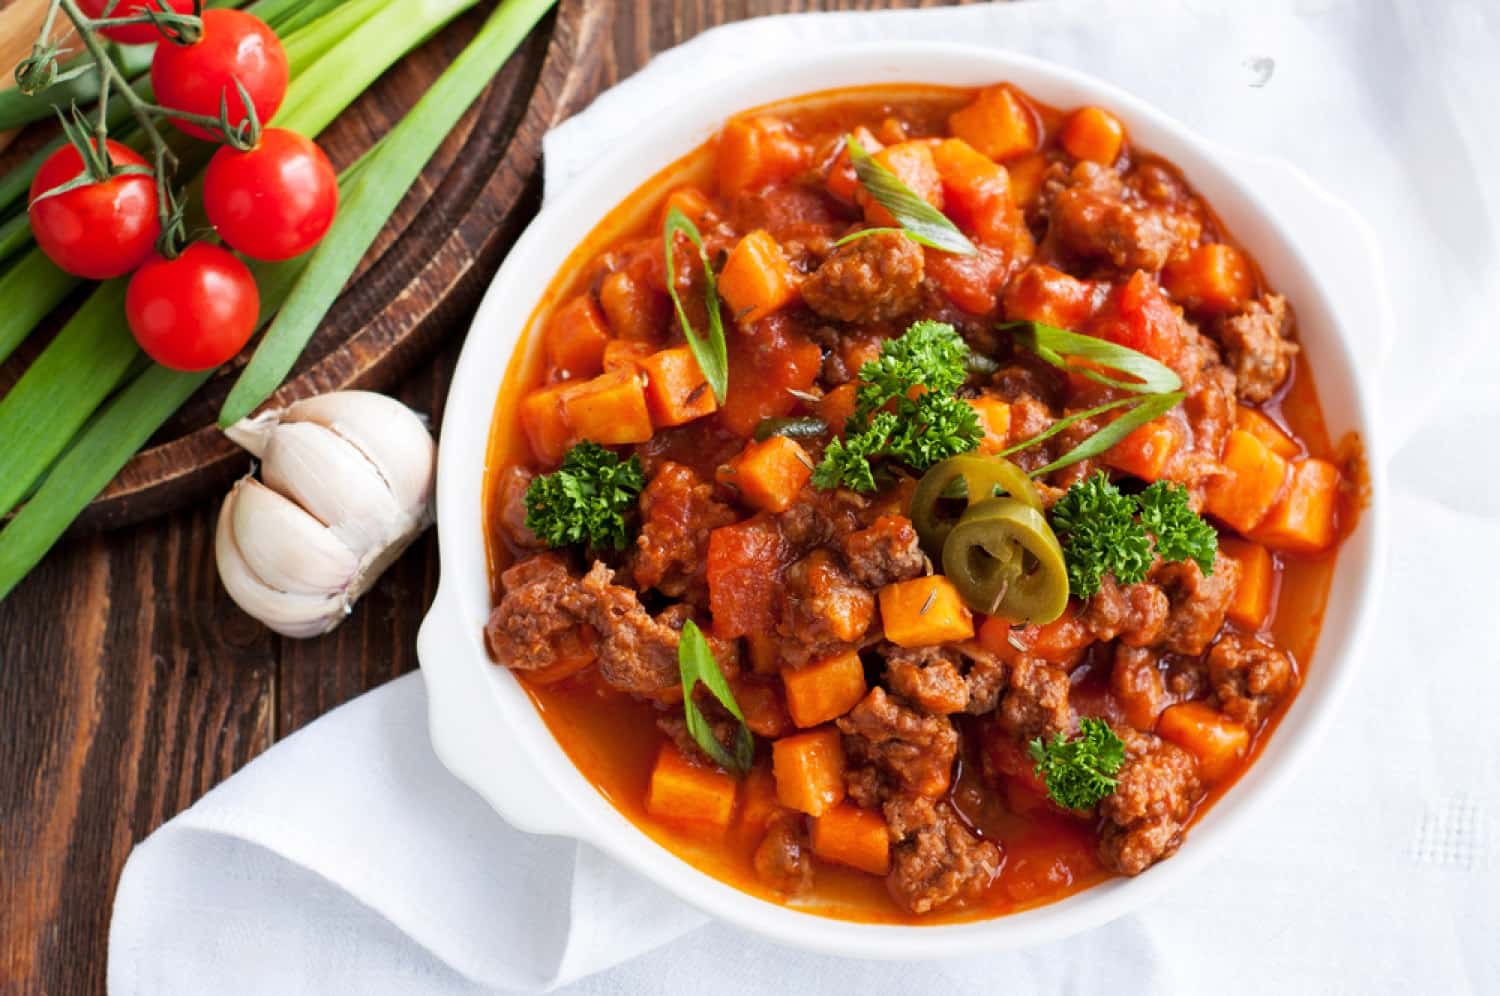 Chicken and Sweet Potato Chili: Old Chili is Dead